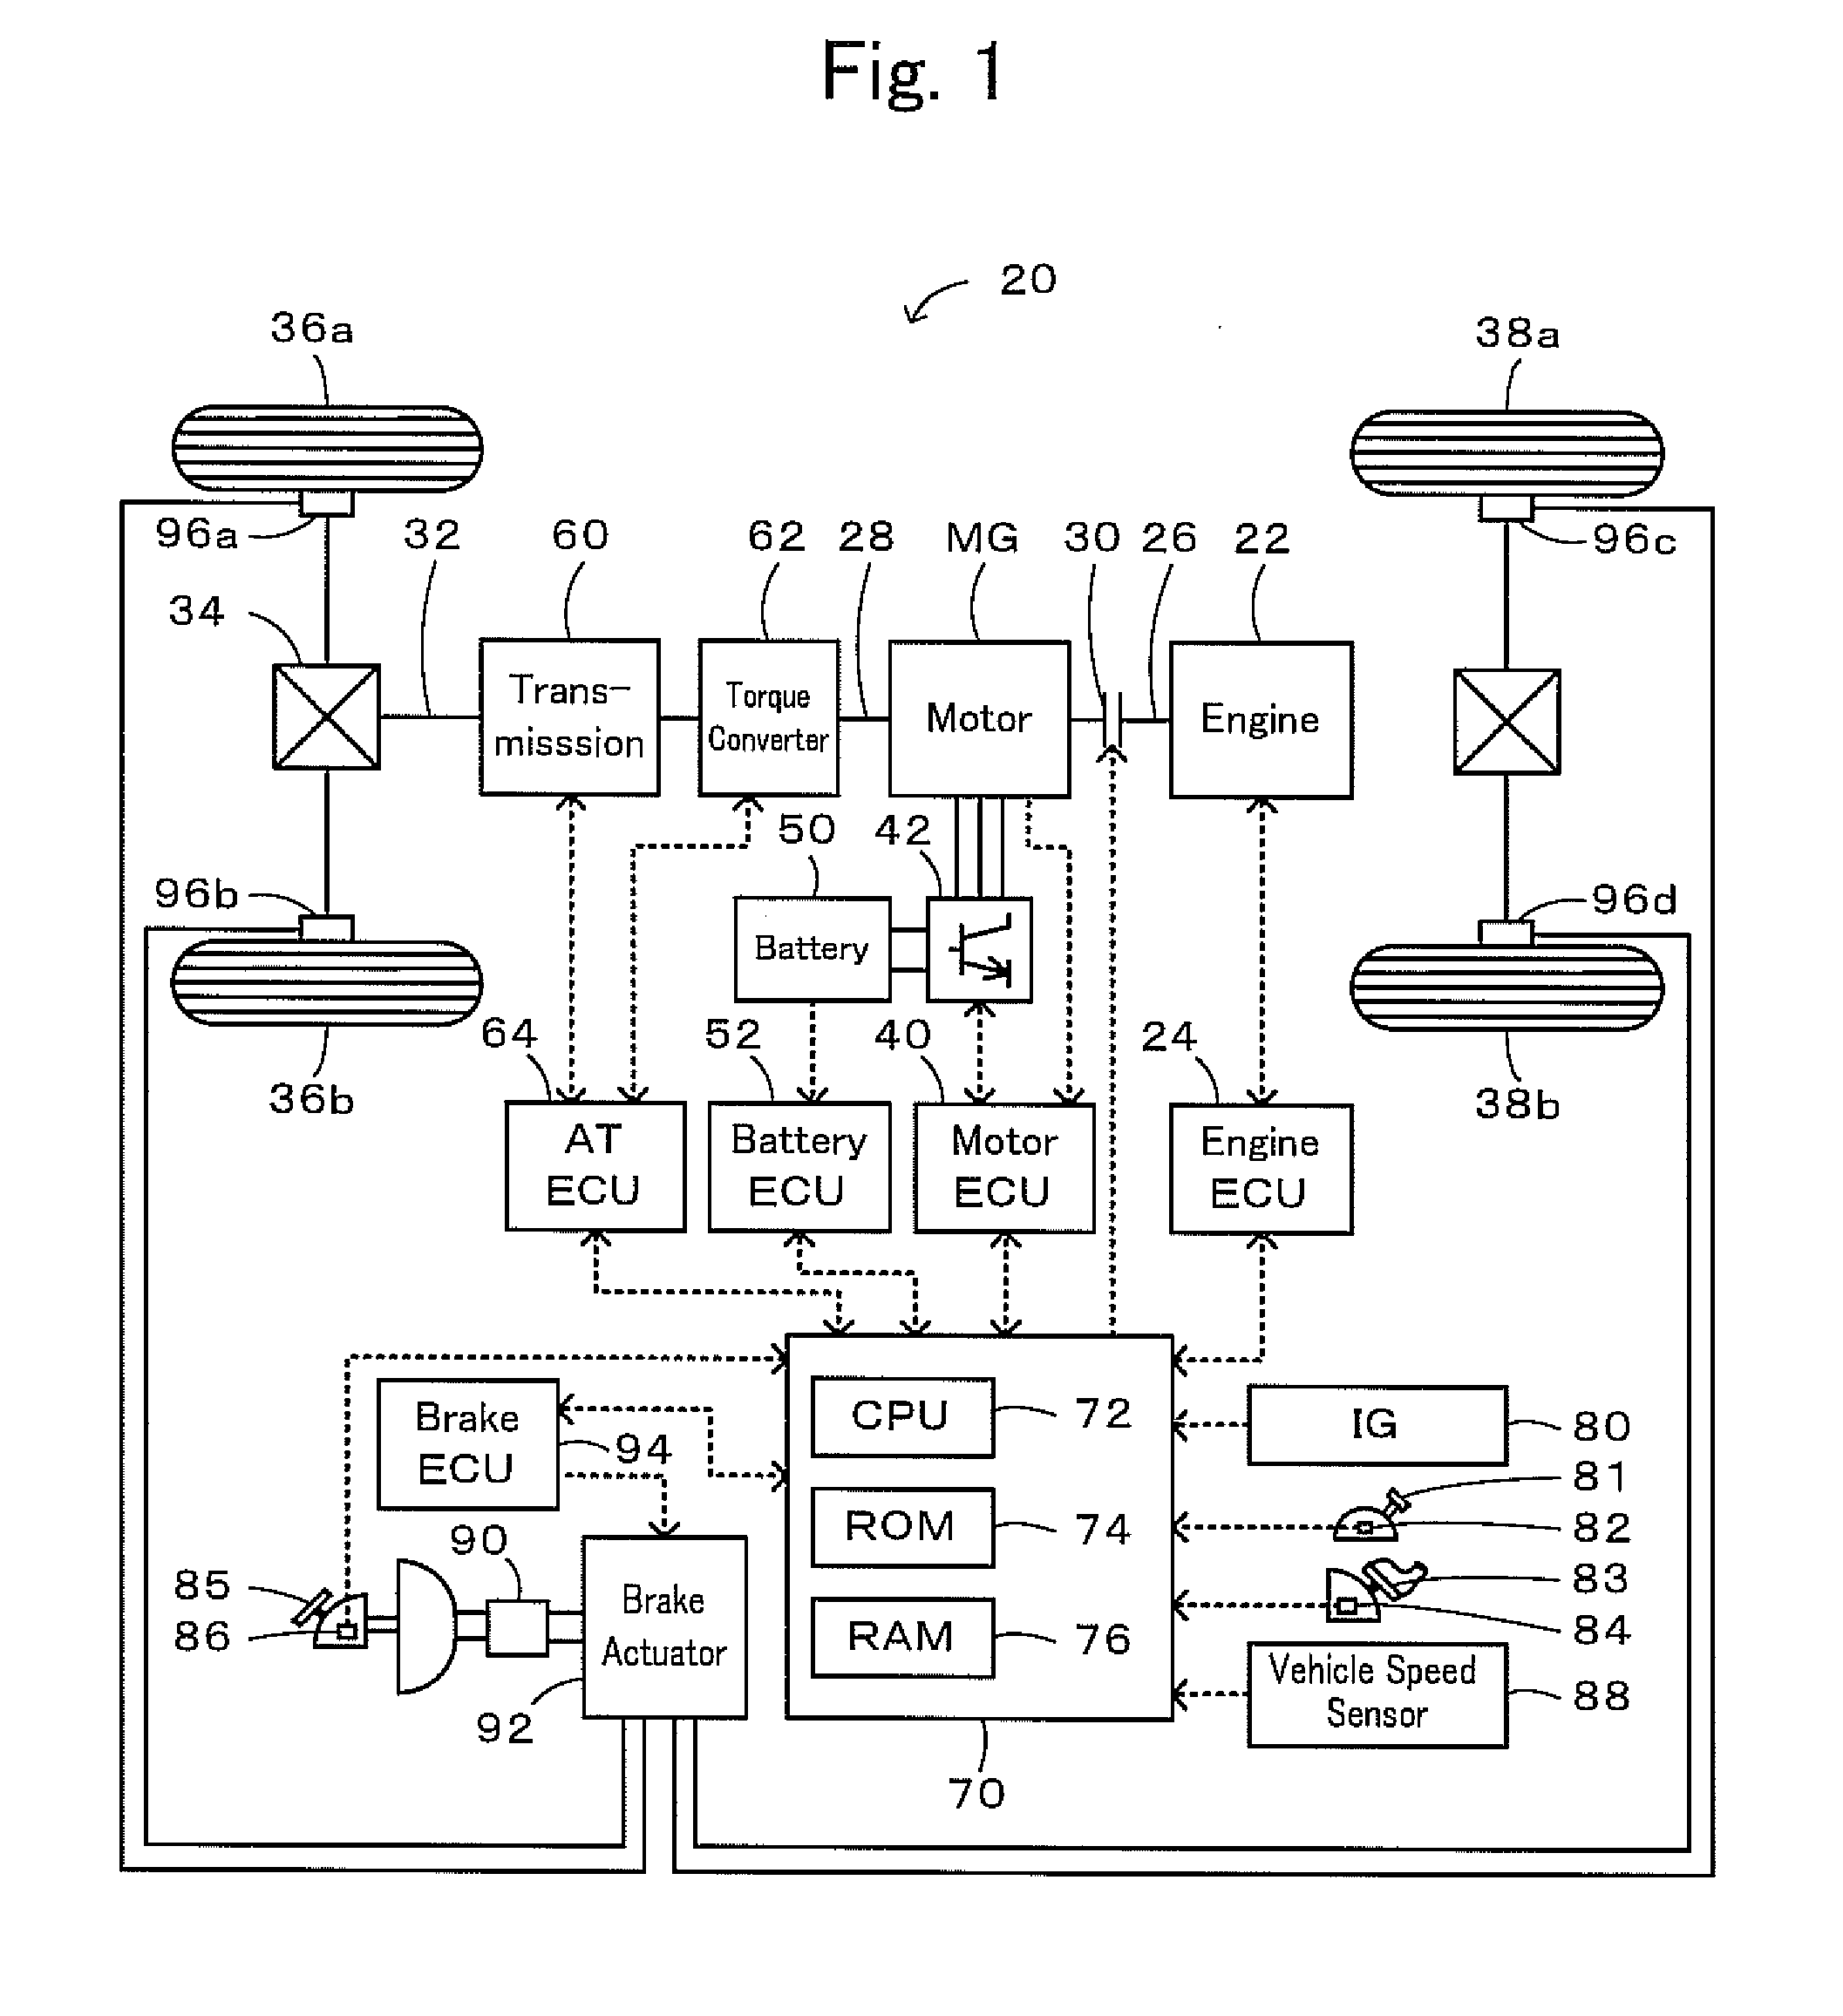 Vehicle and control method thereof